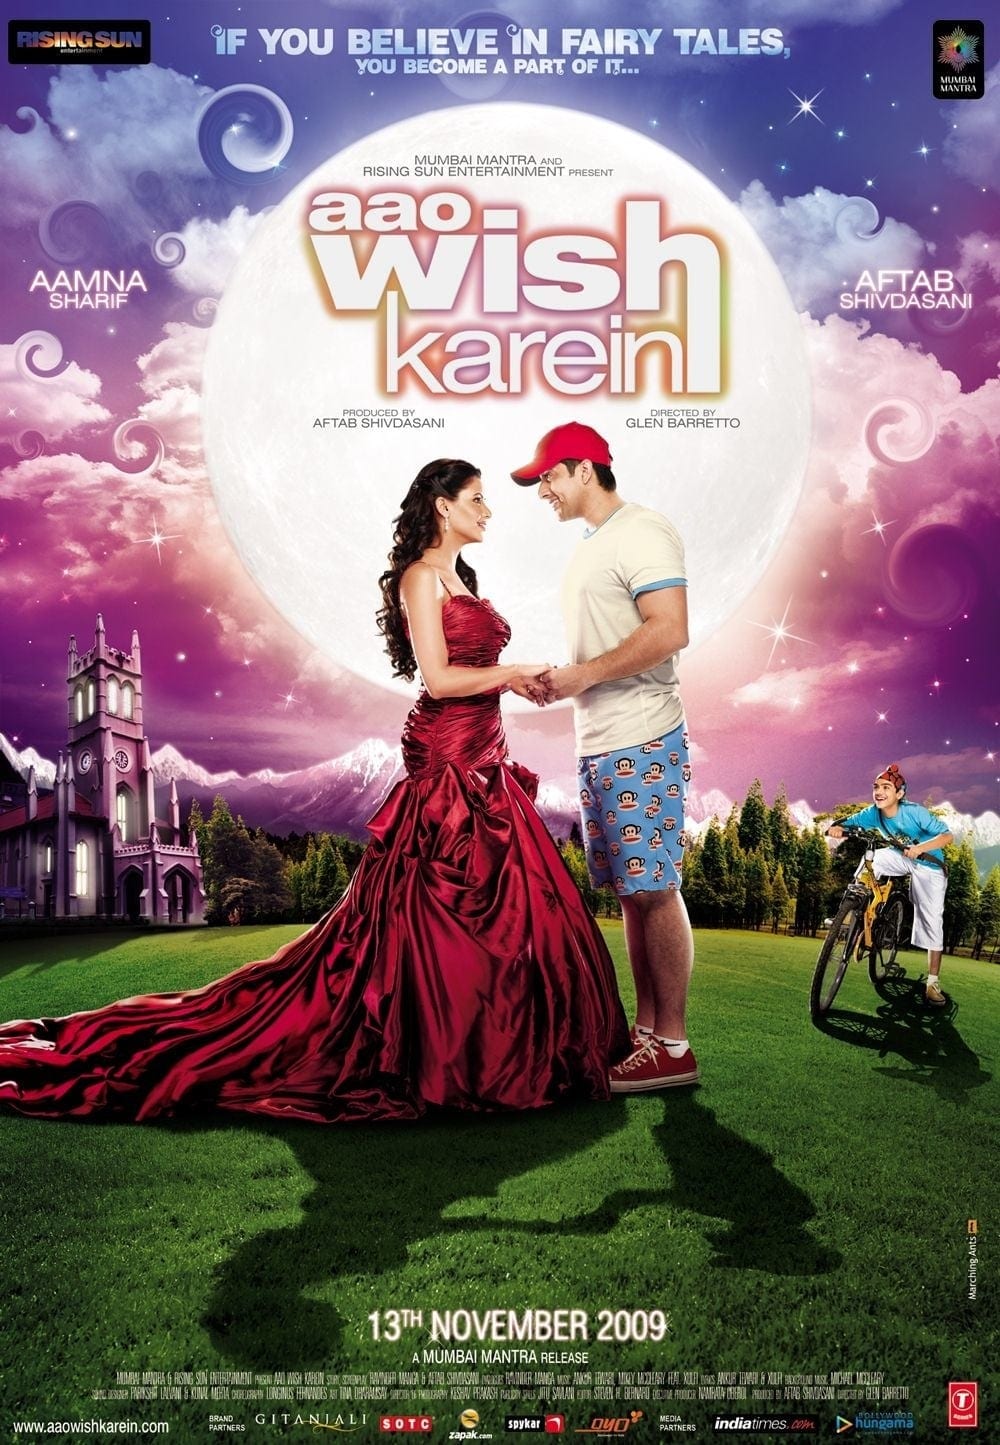 Poster for the movie "Aao Wish Karein"